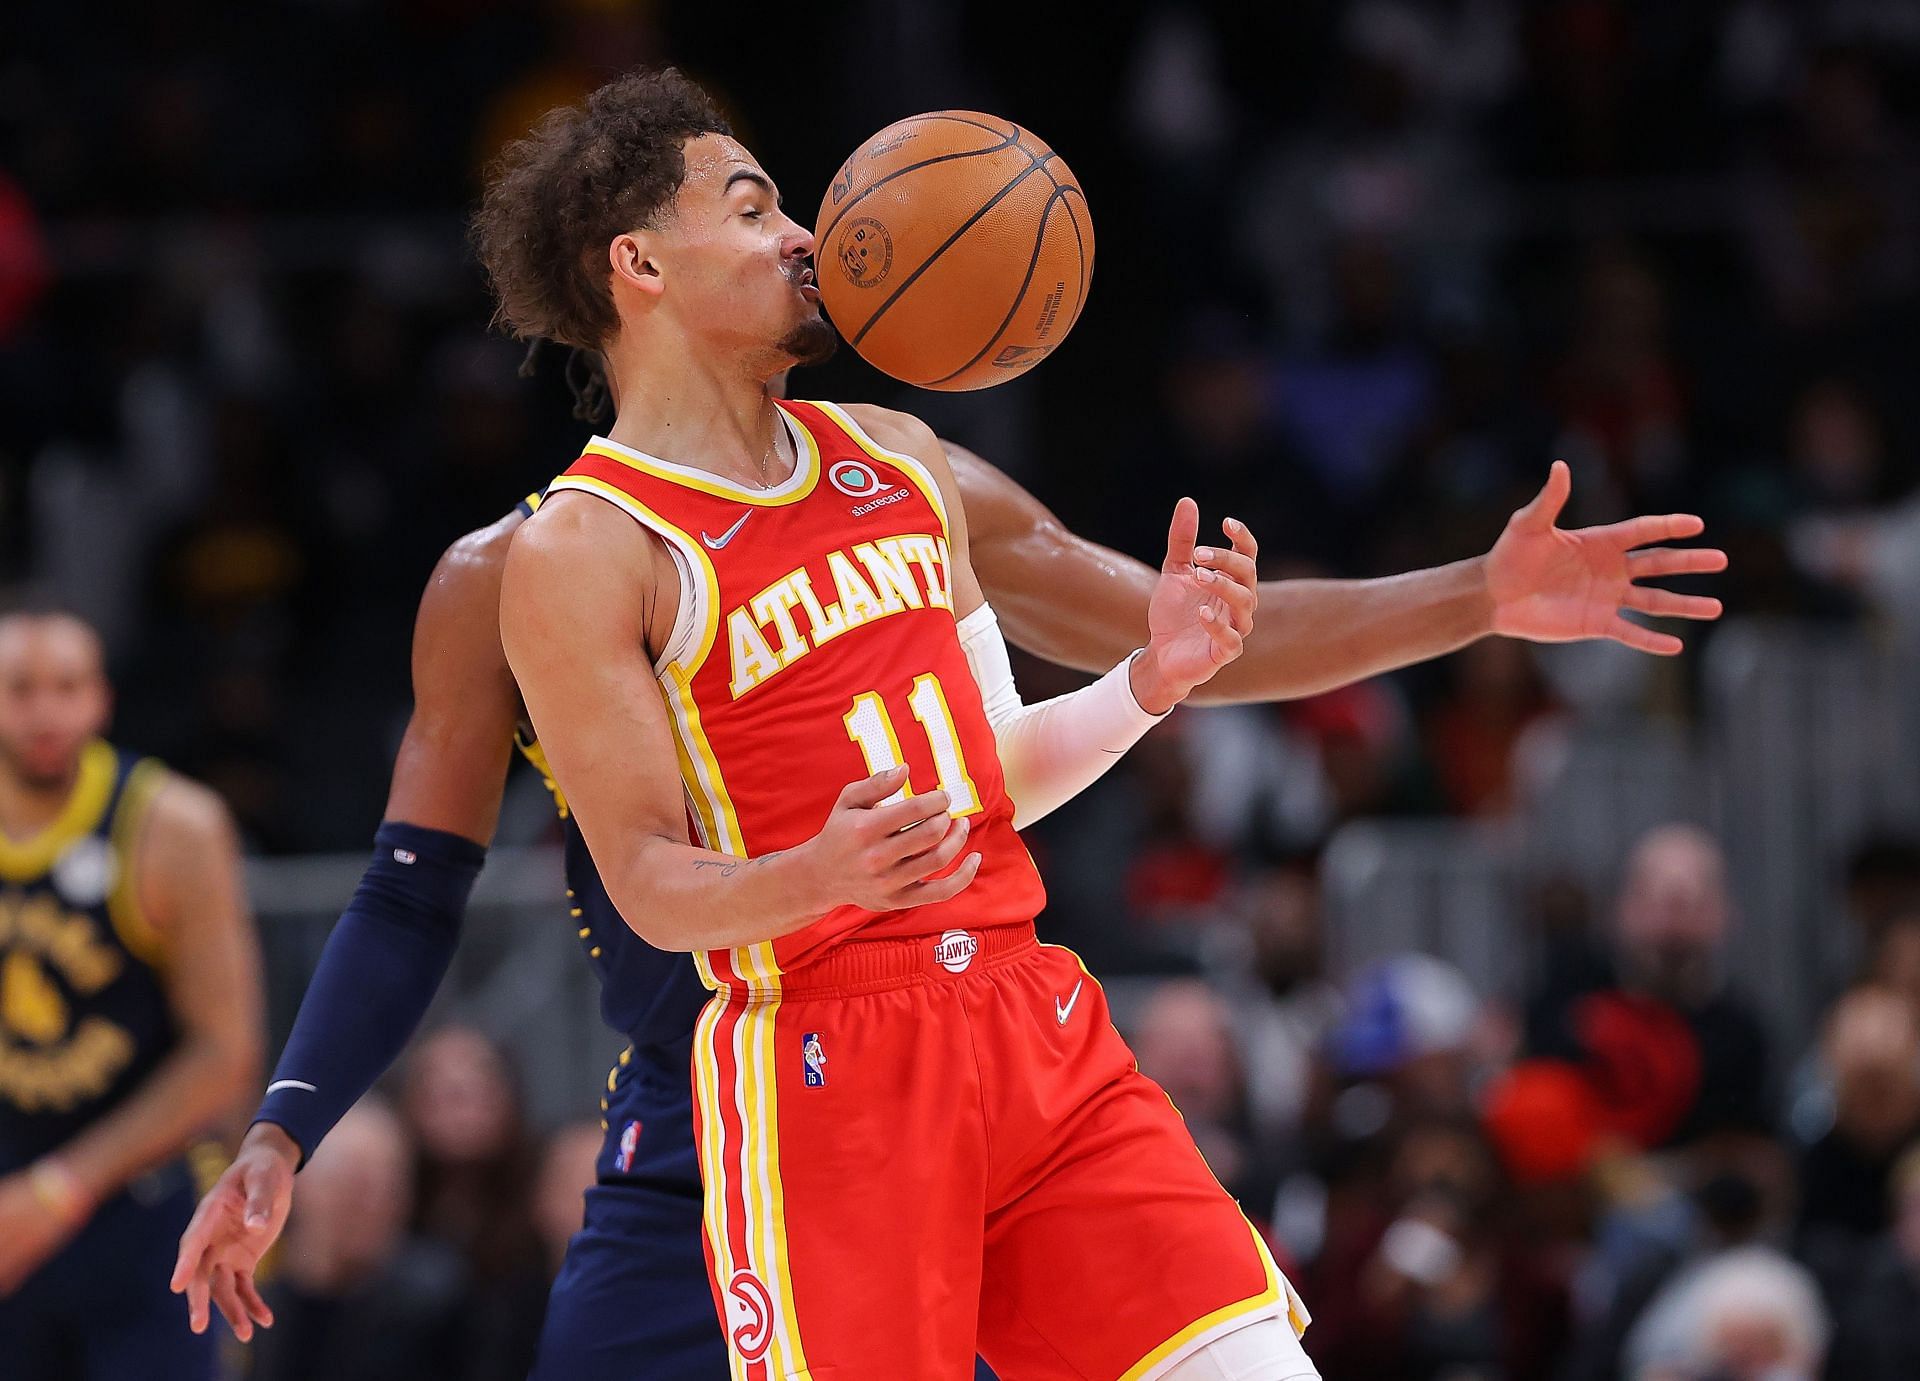 Trae Young of the Atlanta Hawks draws a foul from Buddy Hield of the Indiana Pacers.